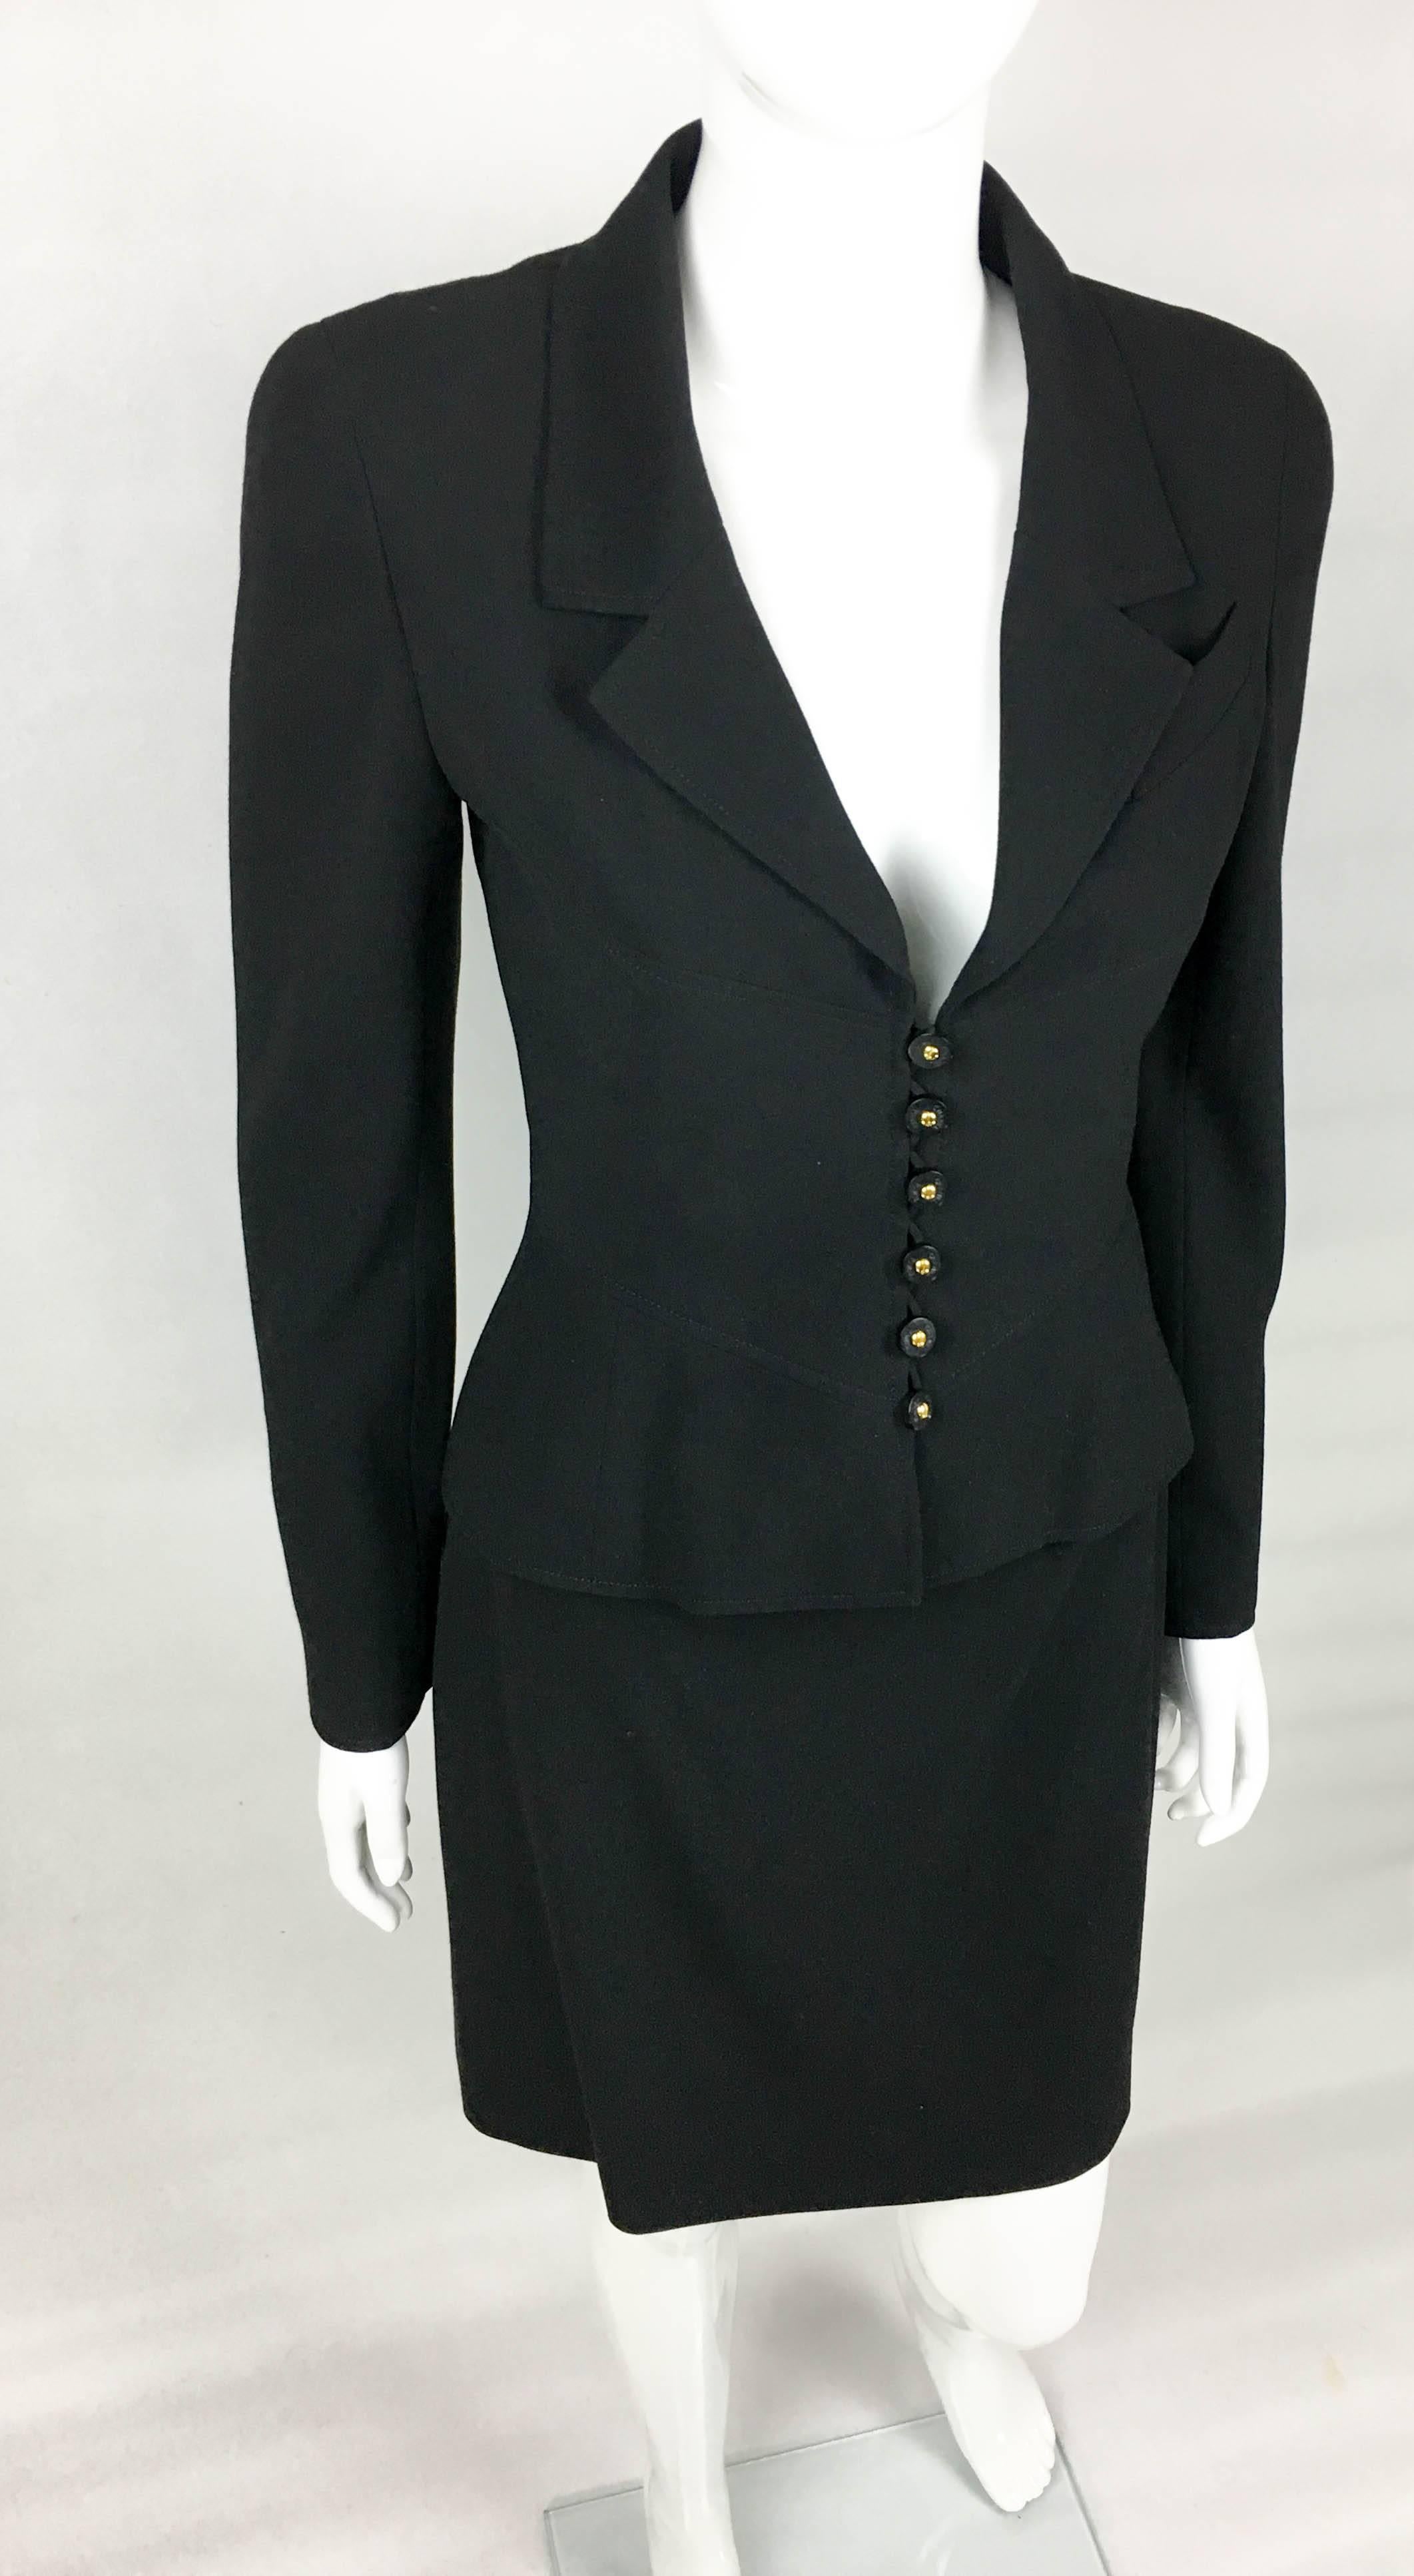 1997 Chanel Black Wool Skirt Suit For Sale 1